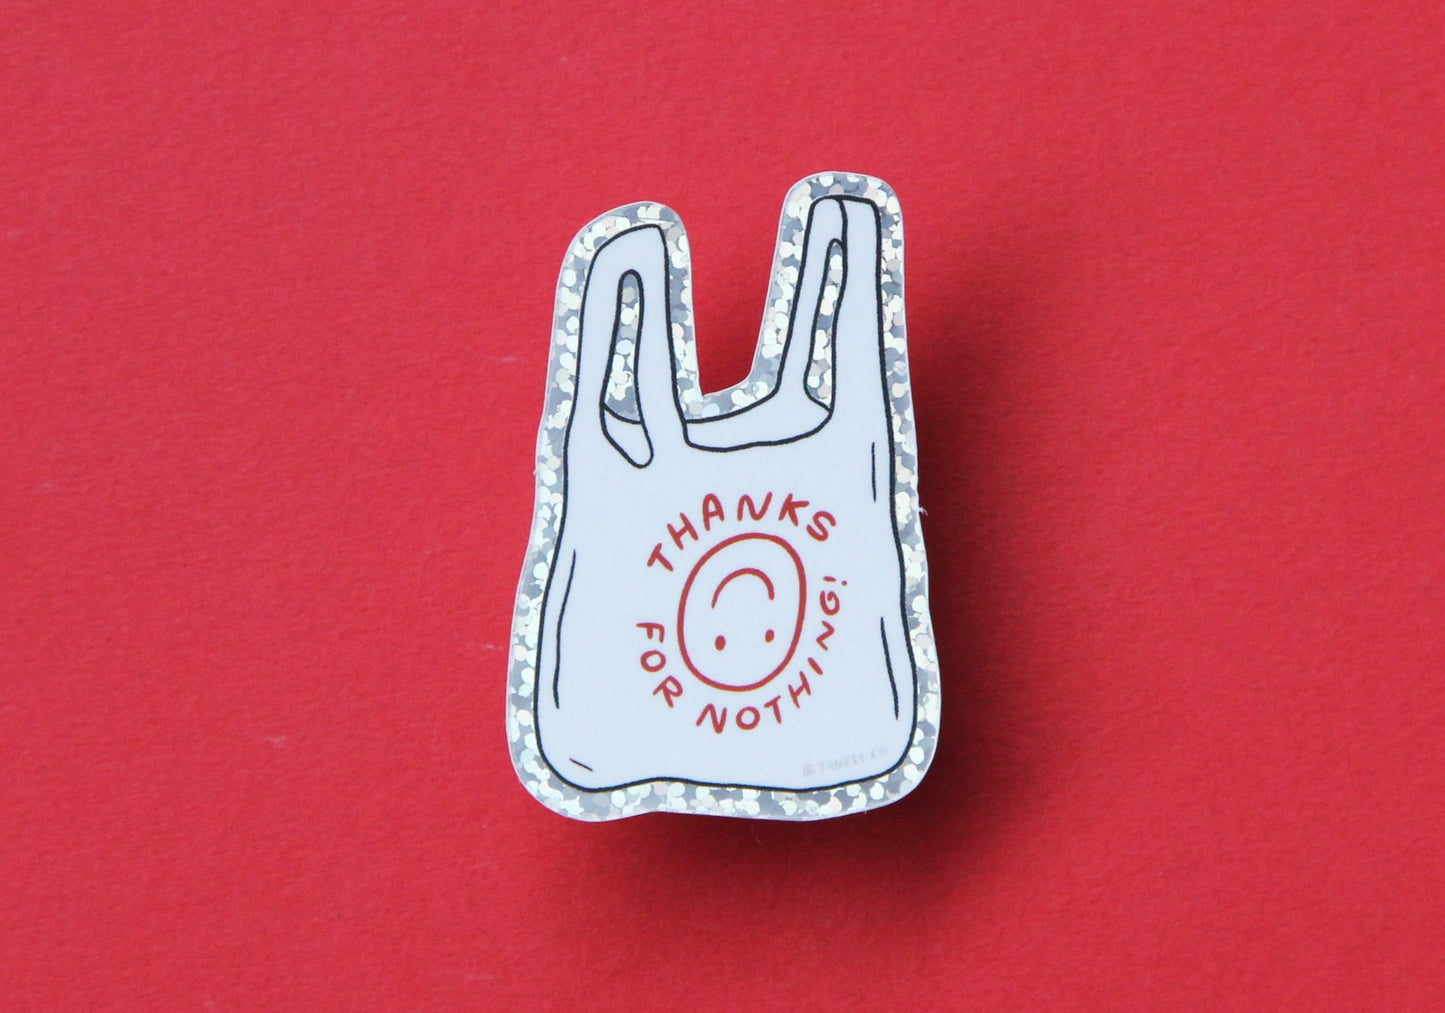 A JaneLi.Co sticker that says "Thanks For Nothing" in the shape of a plastic takeout bag over a red background.